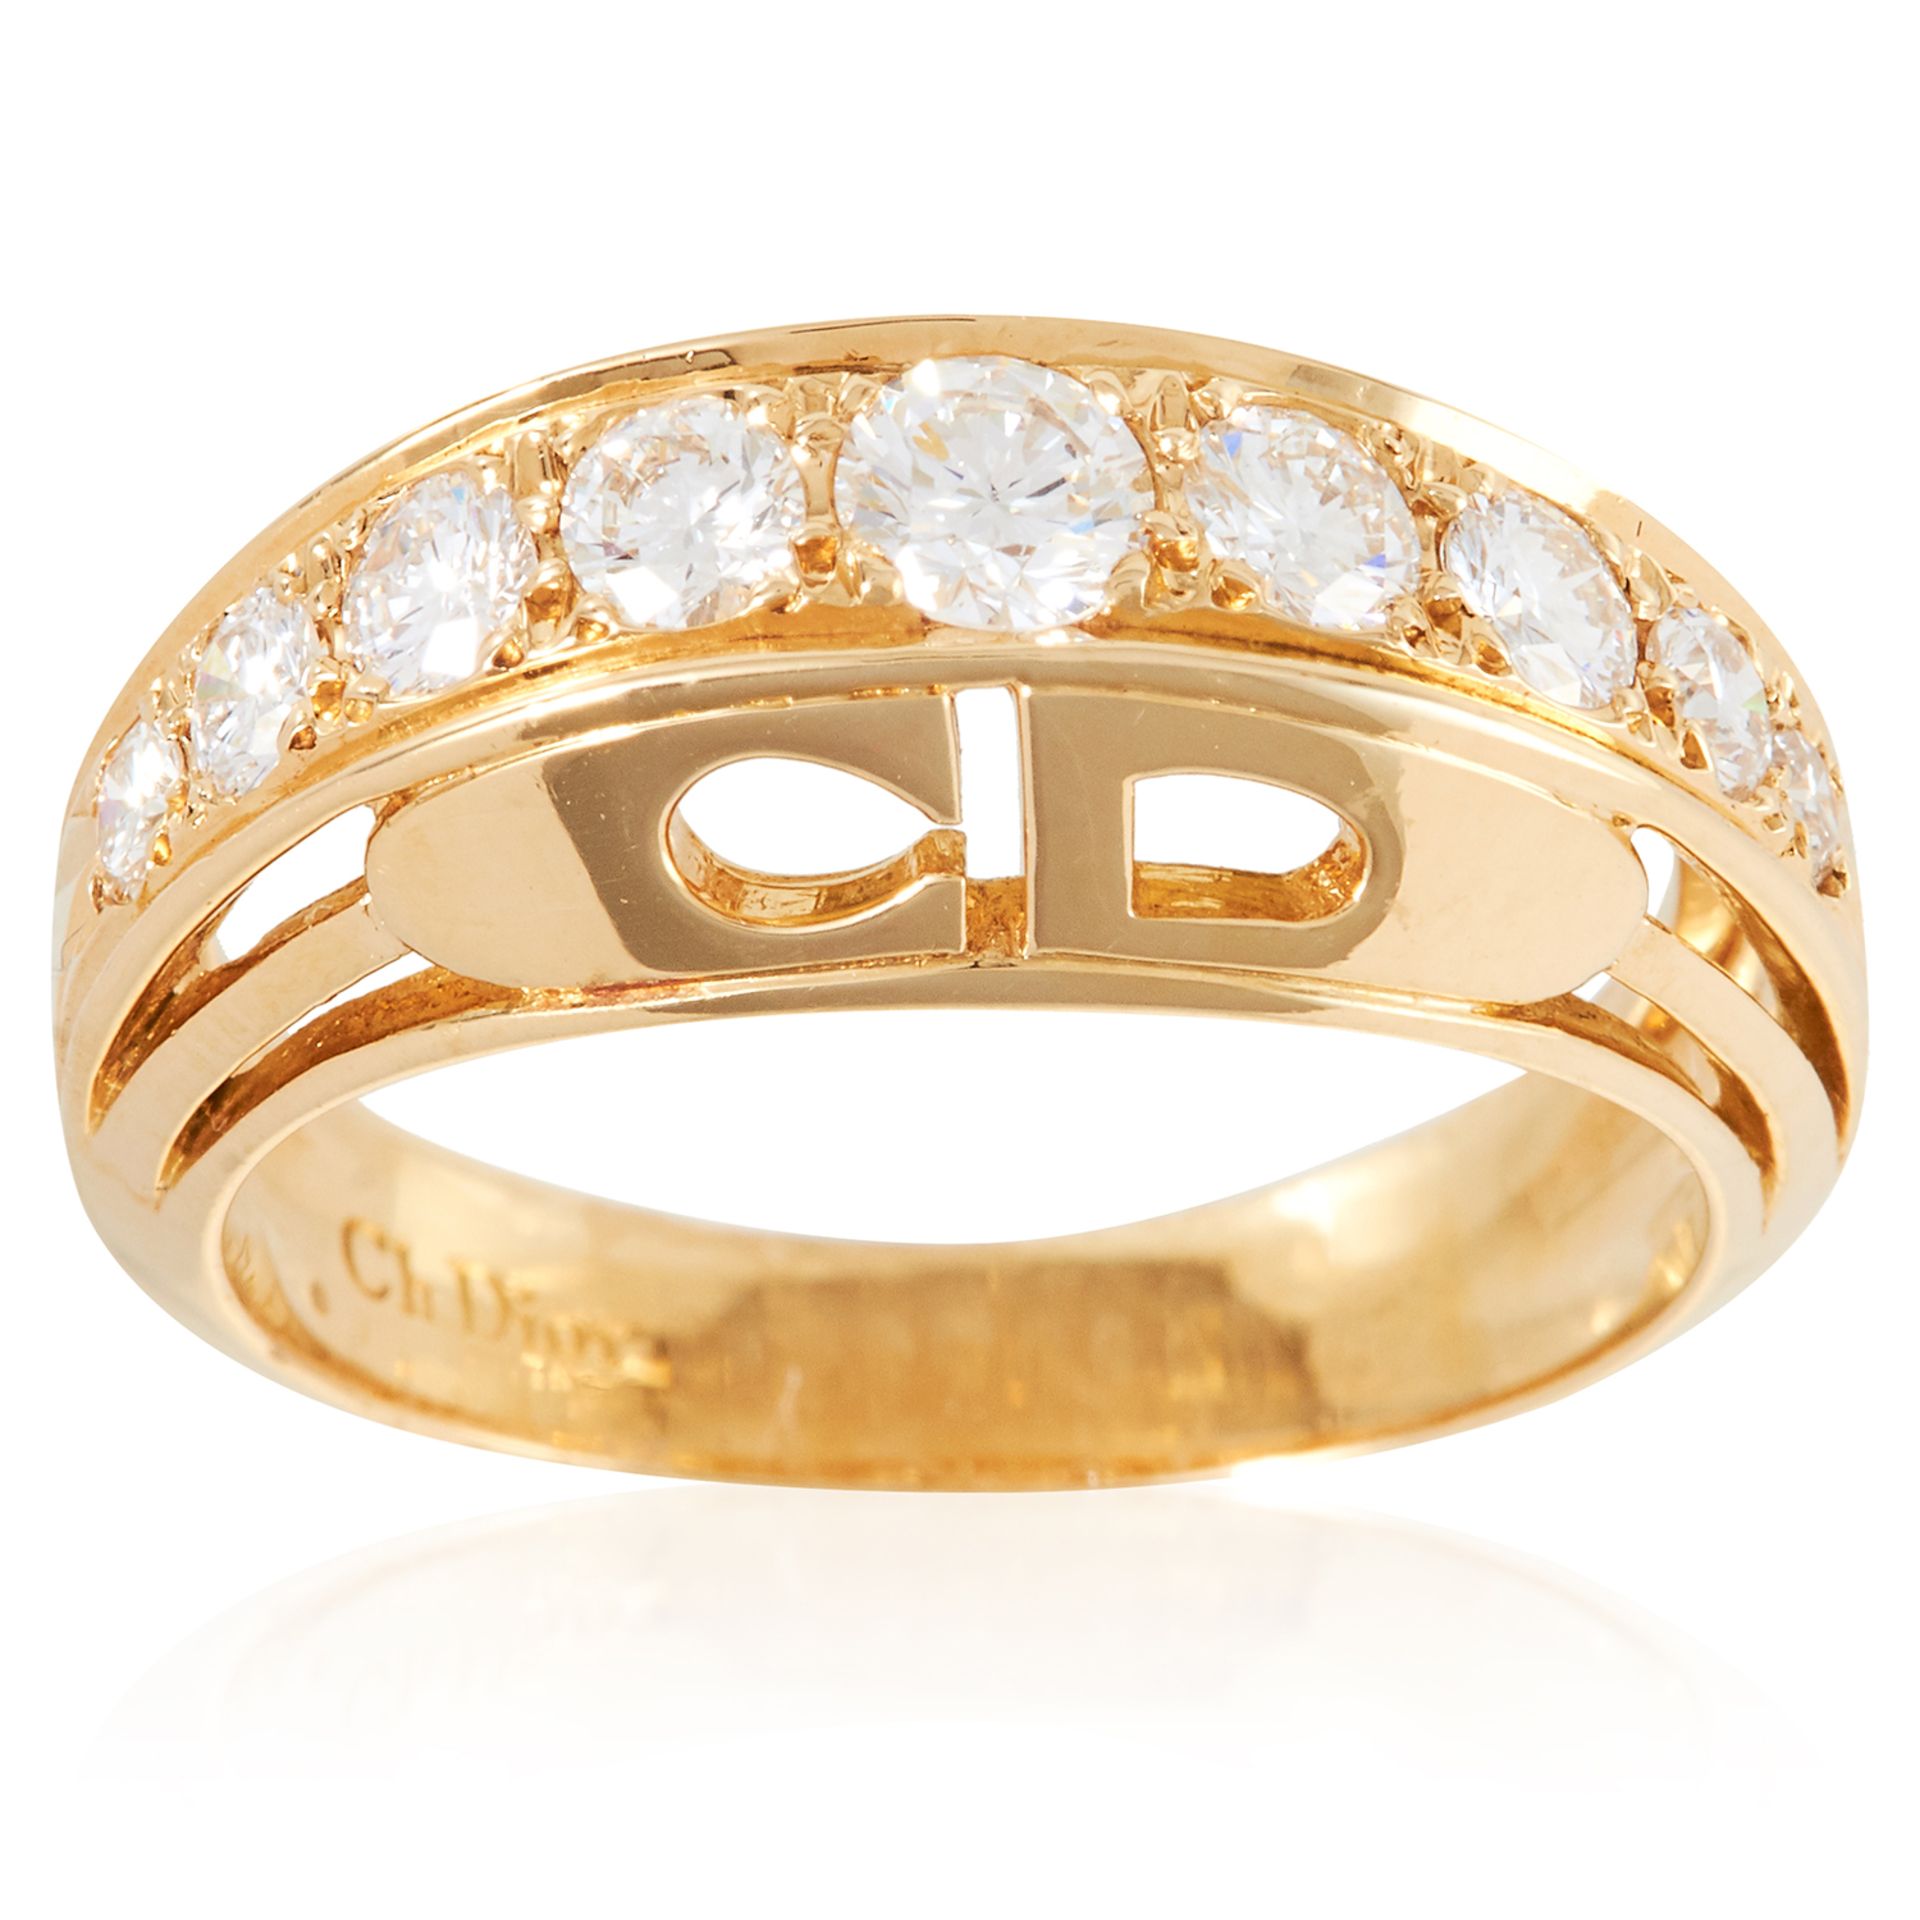 A 1.00 CARAT DIAMOND DRESS RING, DIOR in 18ct yellow gold, set with a row of round cut diamonds